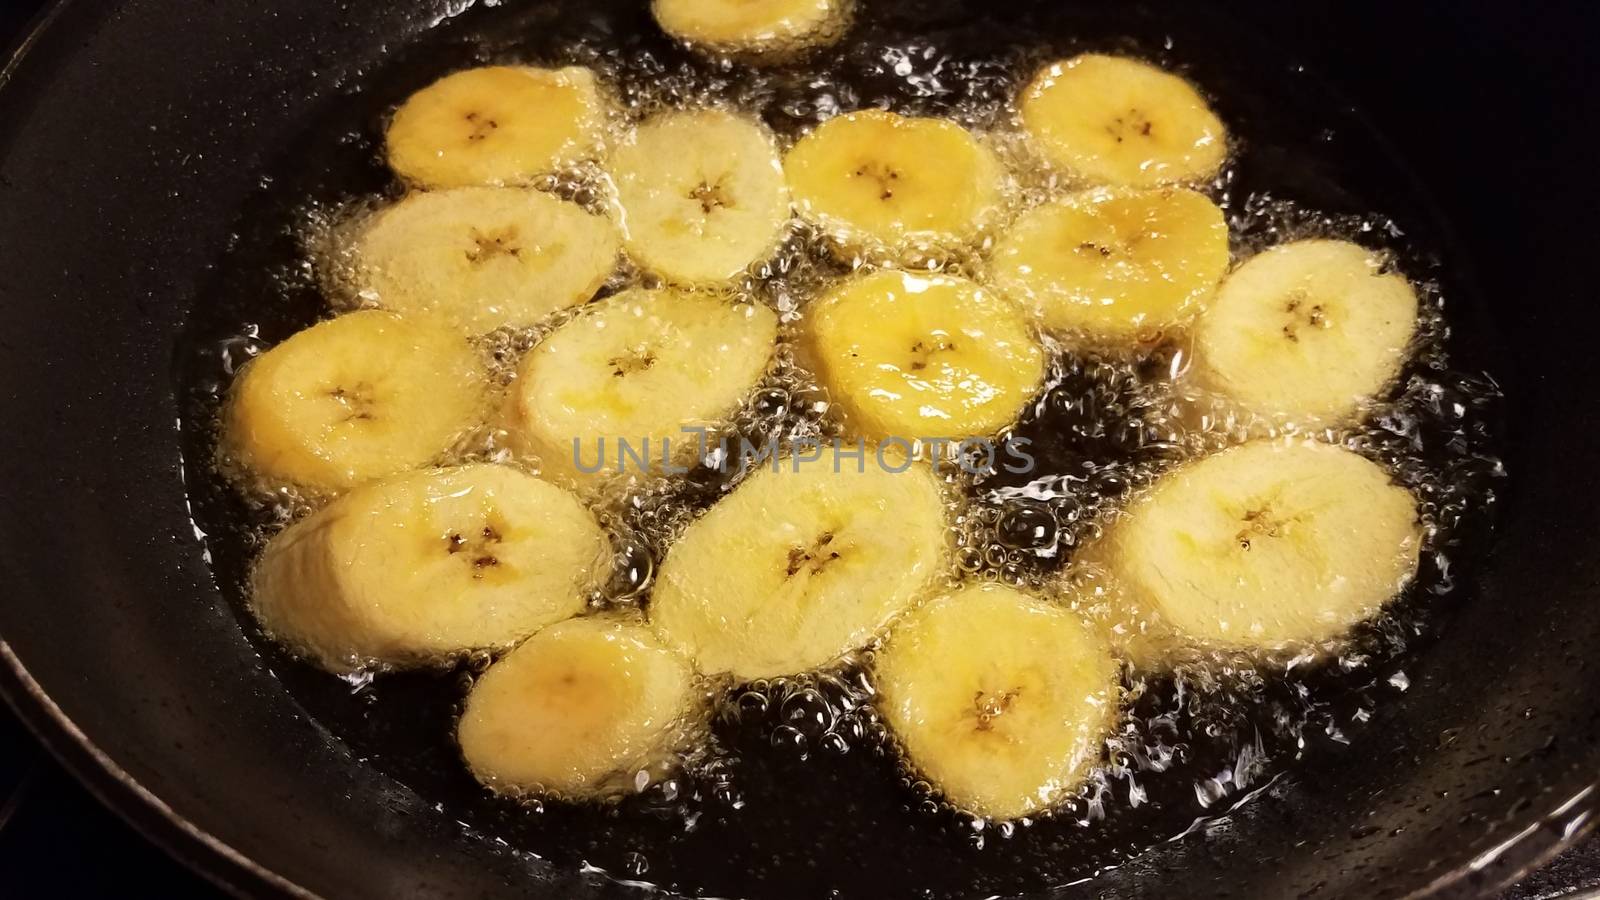 plantain banana from Puerto Rico boiling in oil by stockphotofan1